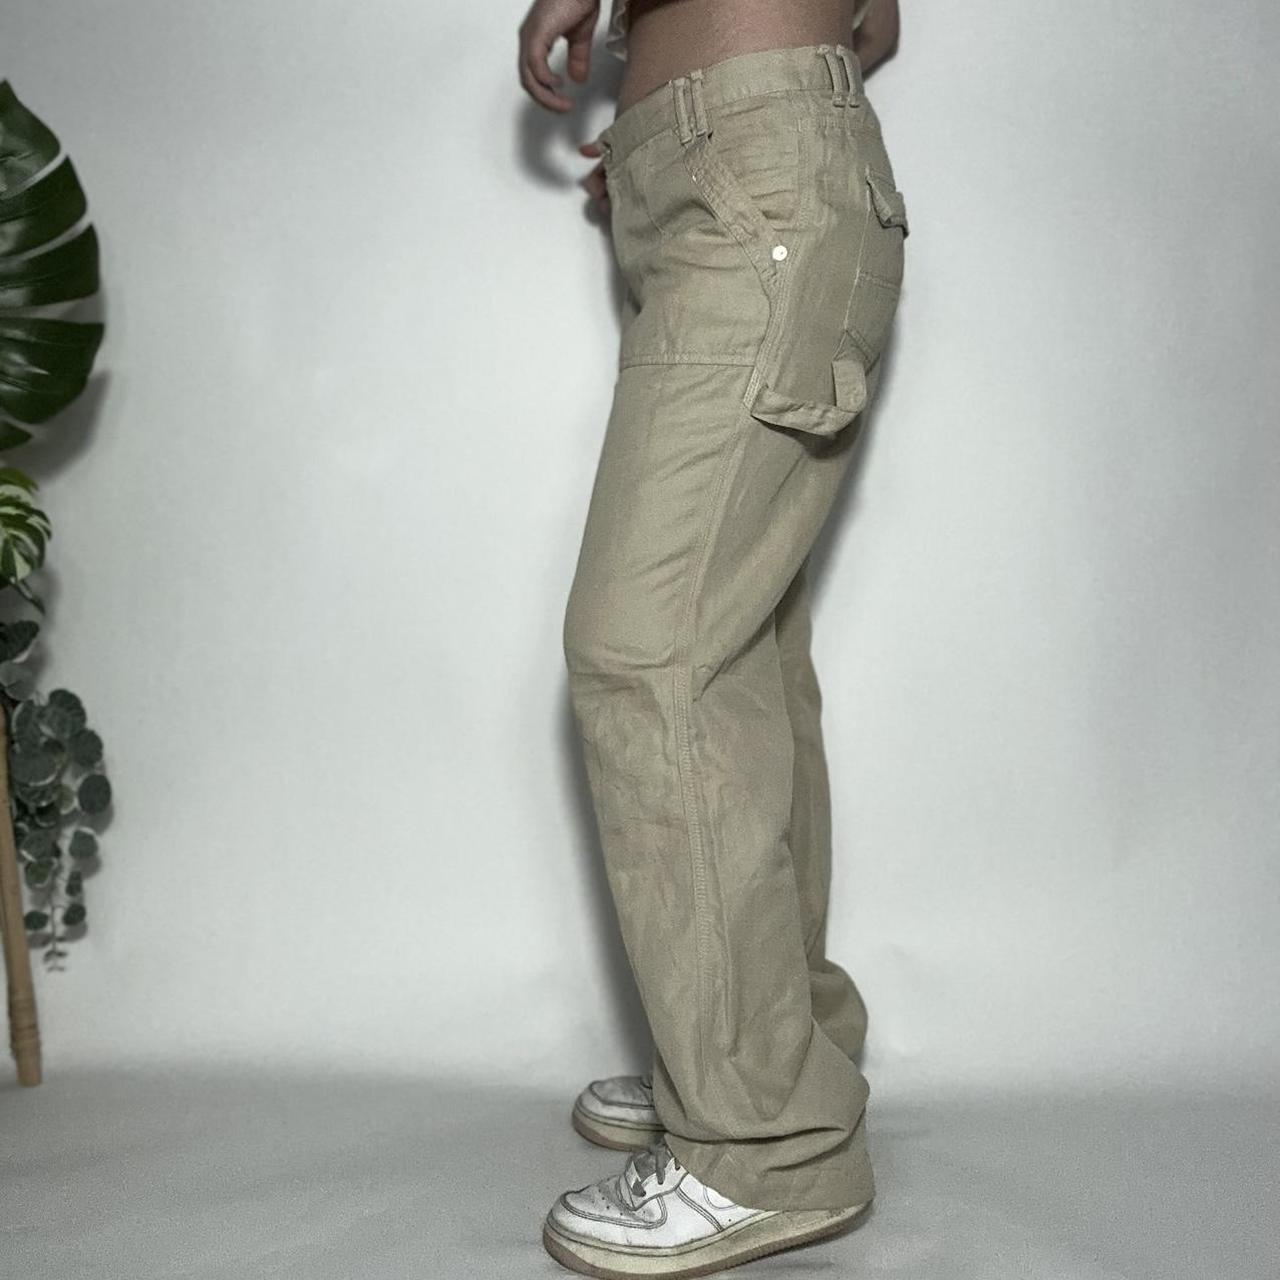 Vintage 90s high-waisted wide-leg tan cargoes